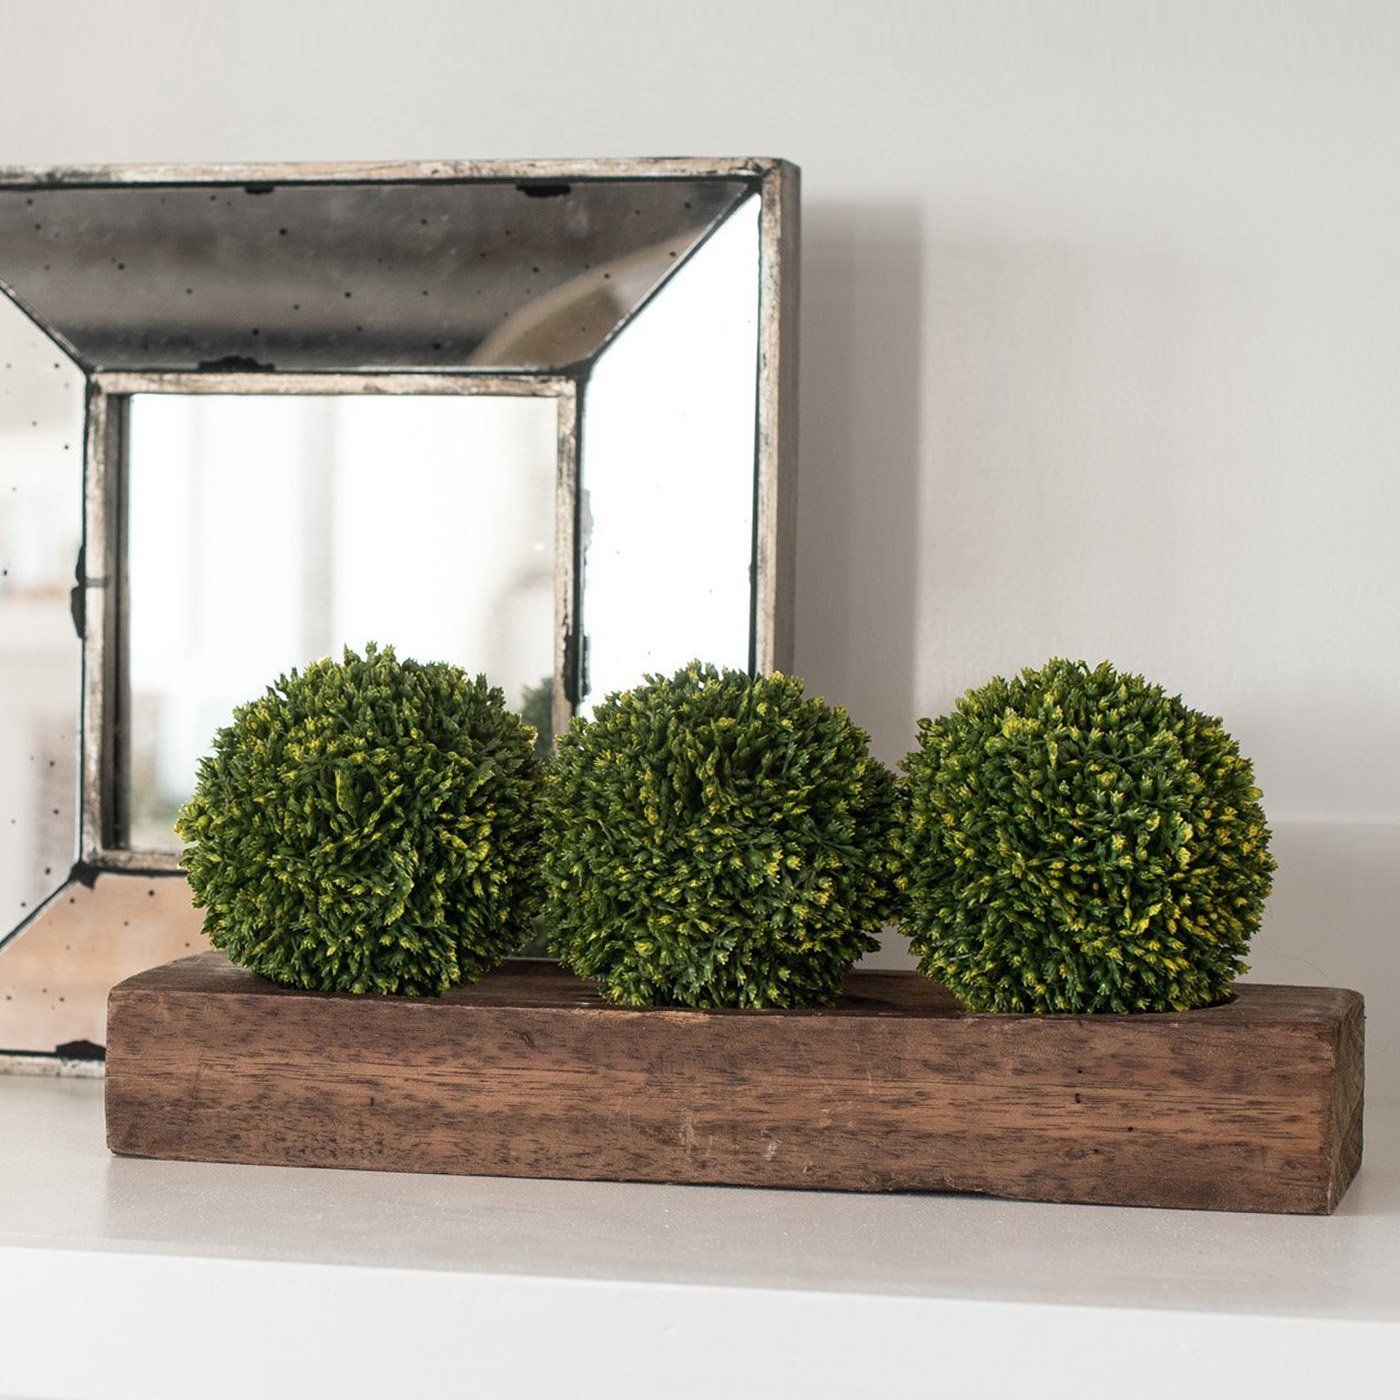 Sets - BRADING HILL 5 PC Set <br>Boxwood Topiaries, Rustic Wooden Tray, Mirror